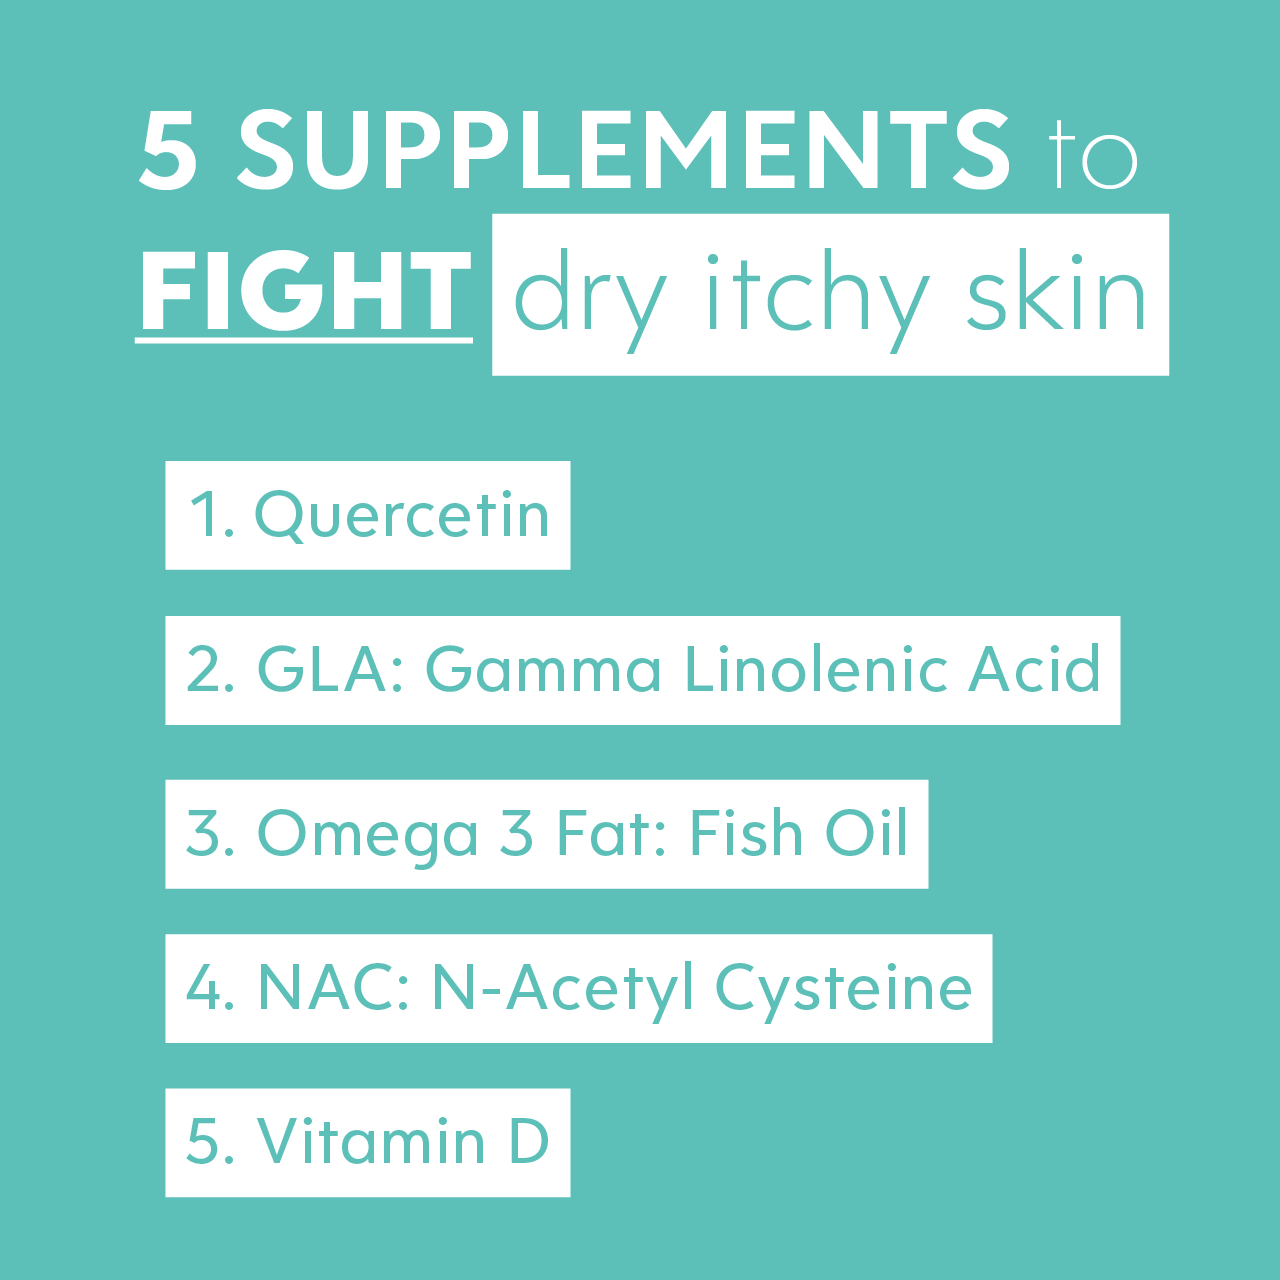 5 supplements for dry itchy skin